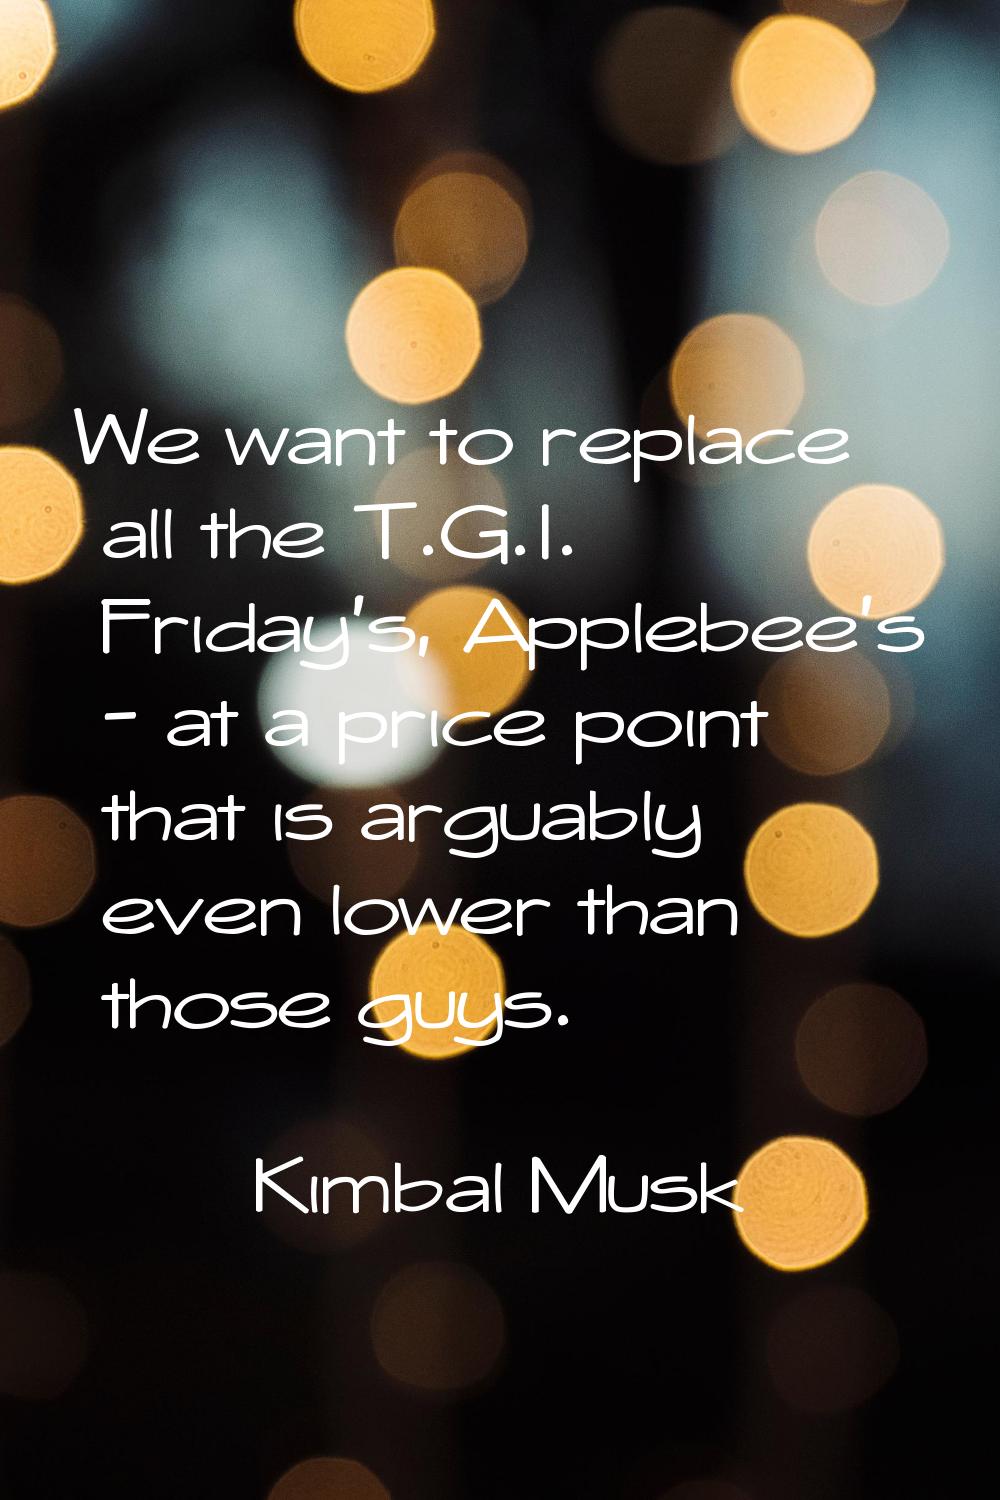 We want to replace all the T.G.I. Friday's, Applebee's - at a price point that is arguably even low